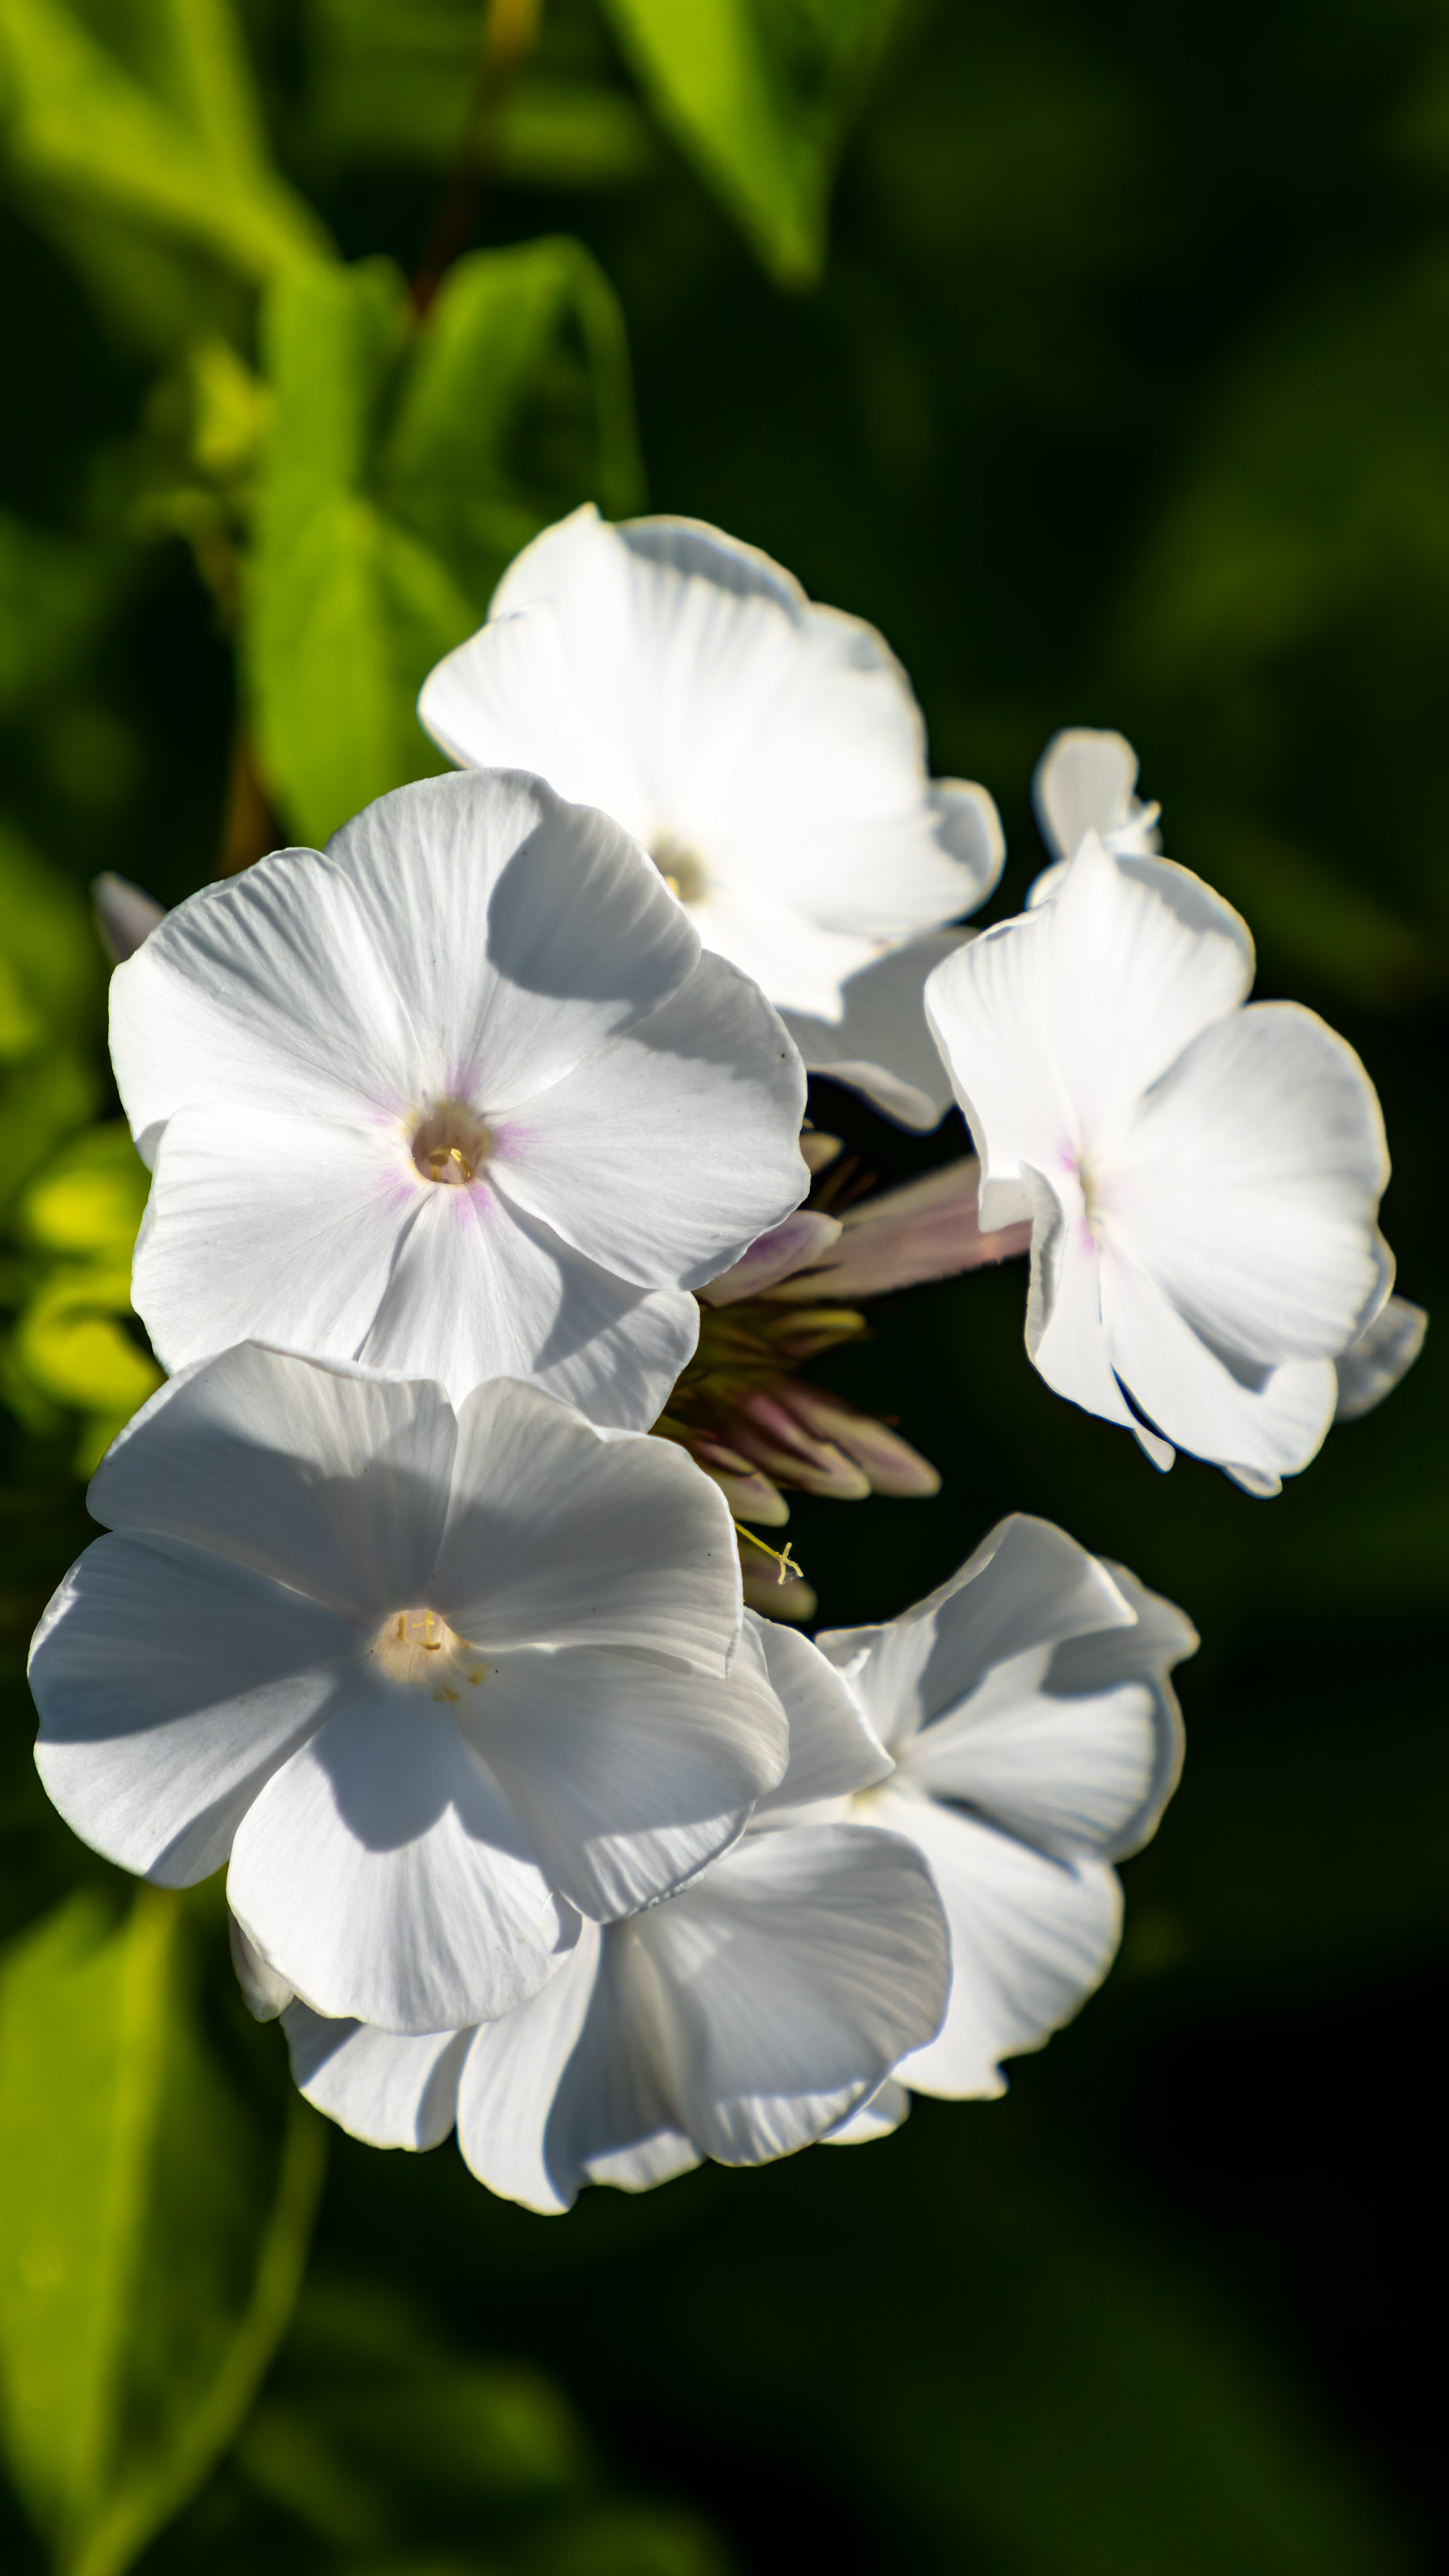 Upgrade your iPhone's aesthetics with the stunning clarity of our 4K white flowers wallpaper.